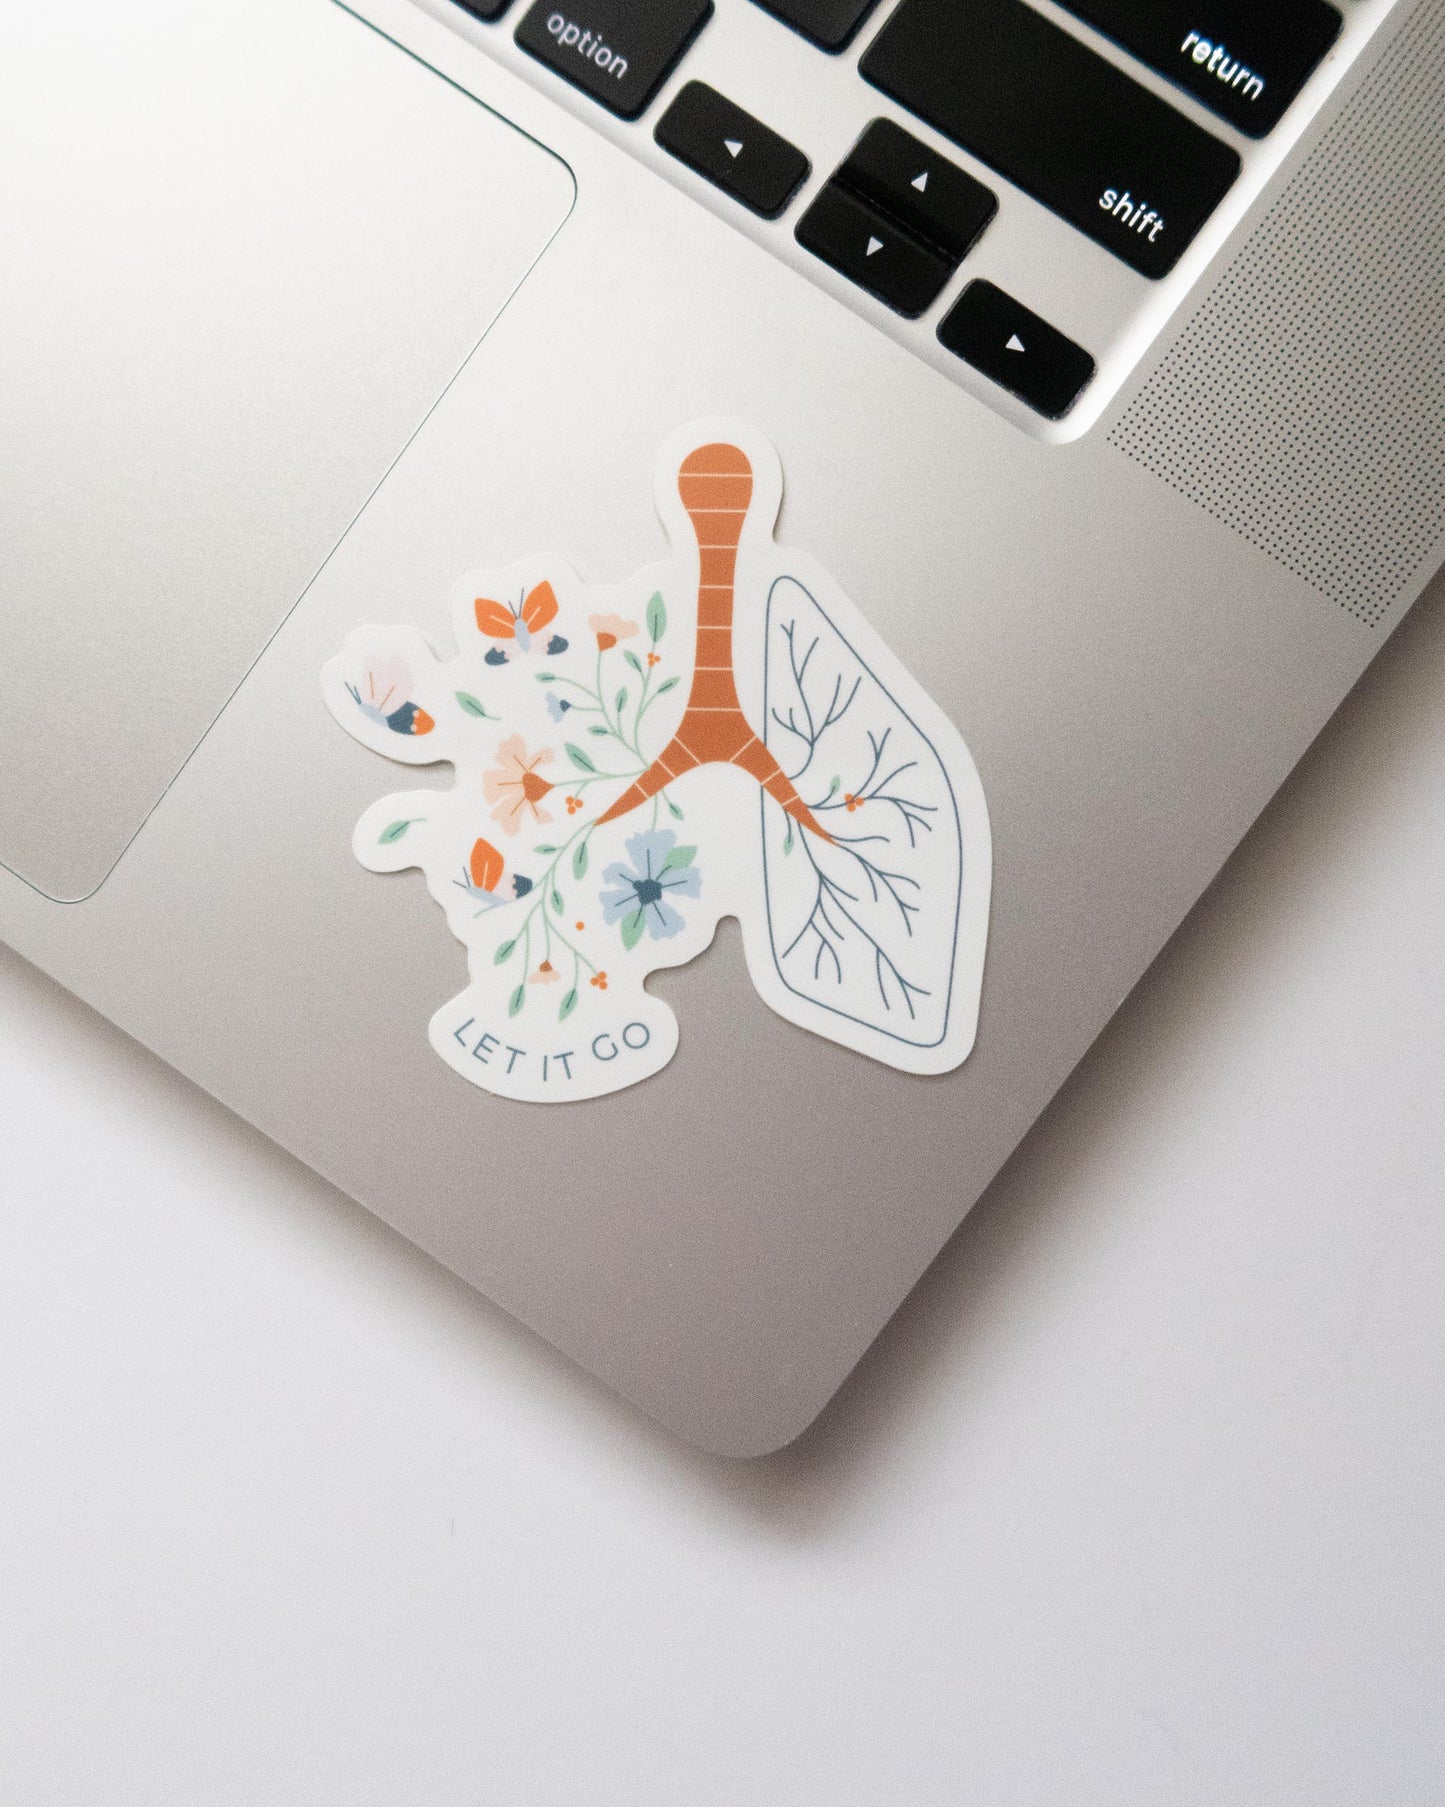 Let it go floral lung anatomy embroidery waterproof vinyl sticker, mental health sticker for laptop